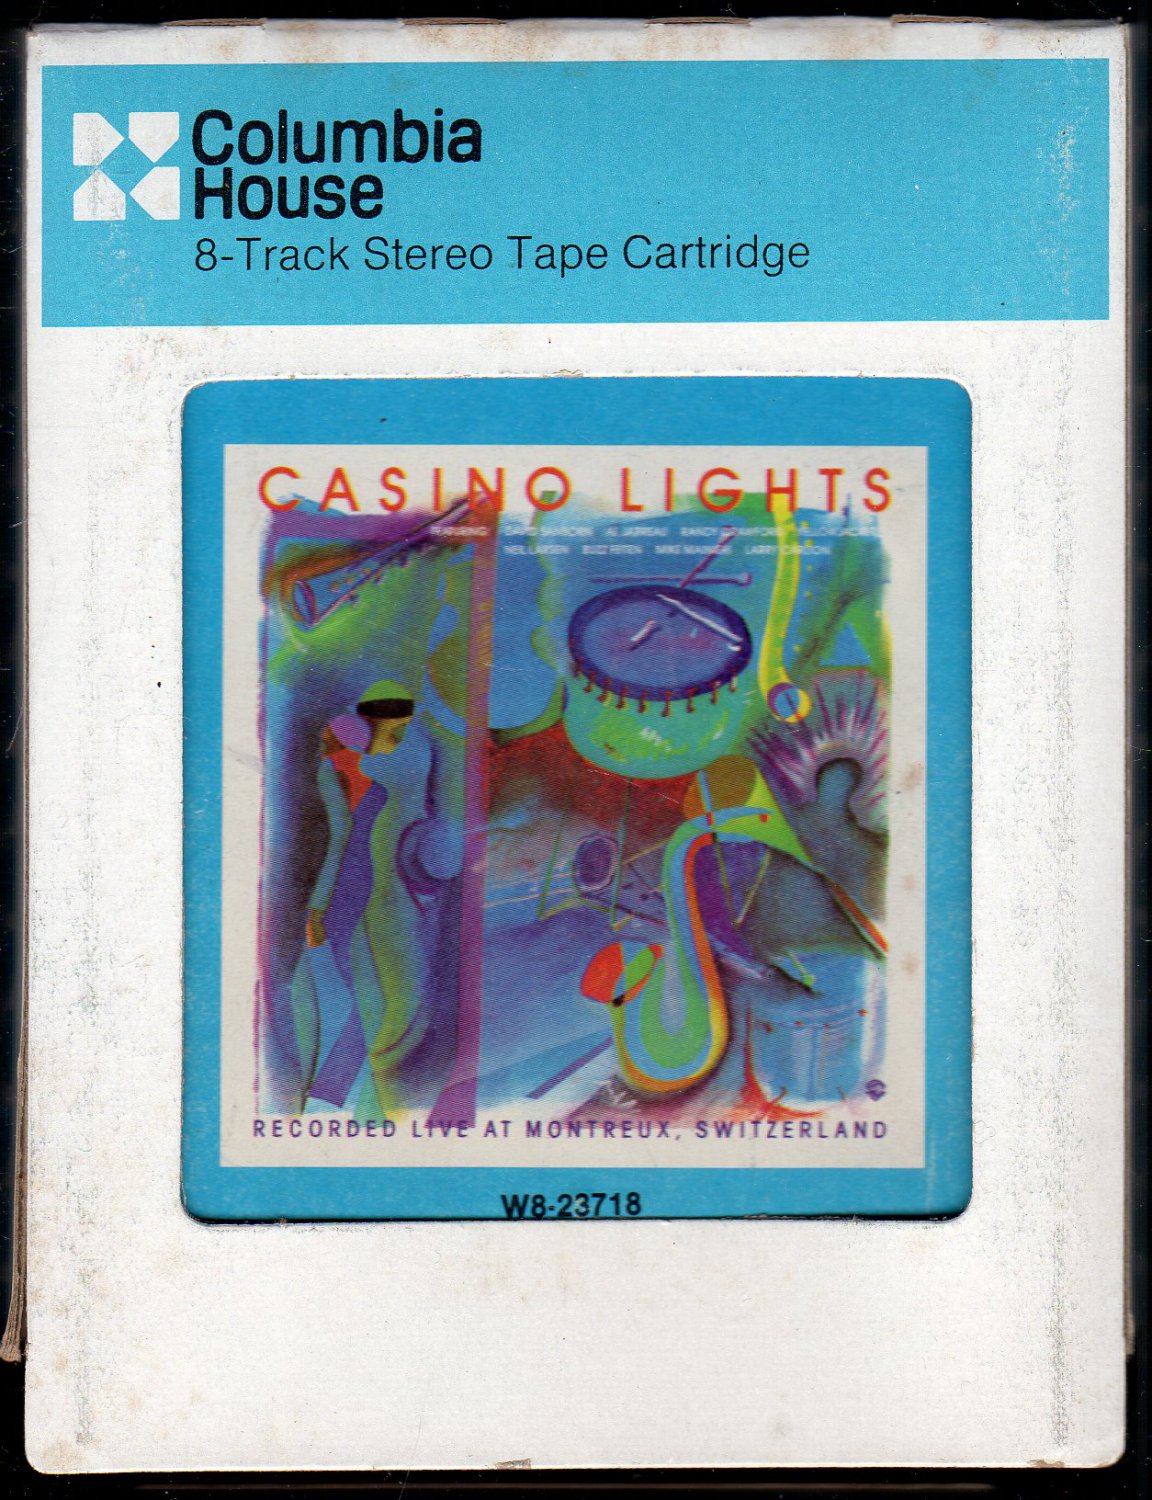 Casino Lights with Al Jarreau - Recorded Live At Montreux Switzerland 1982 CRC 8-track tape